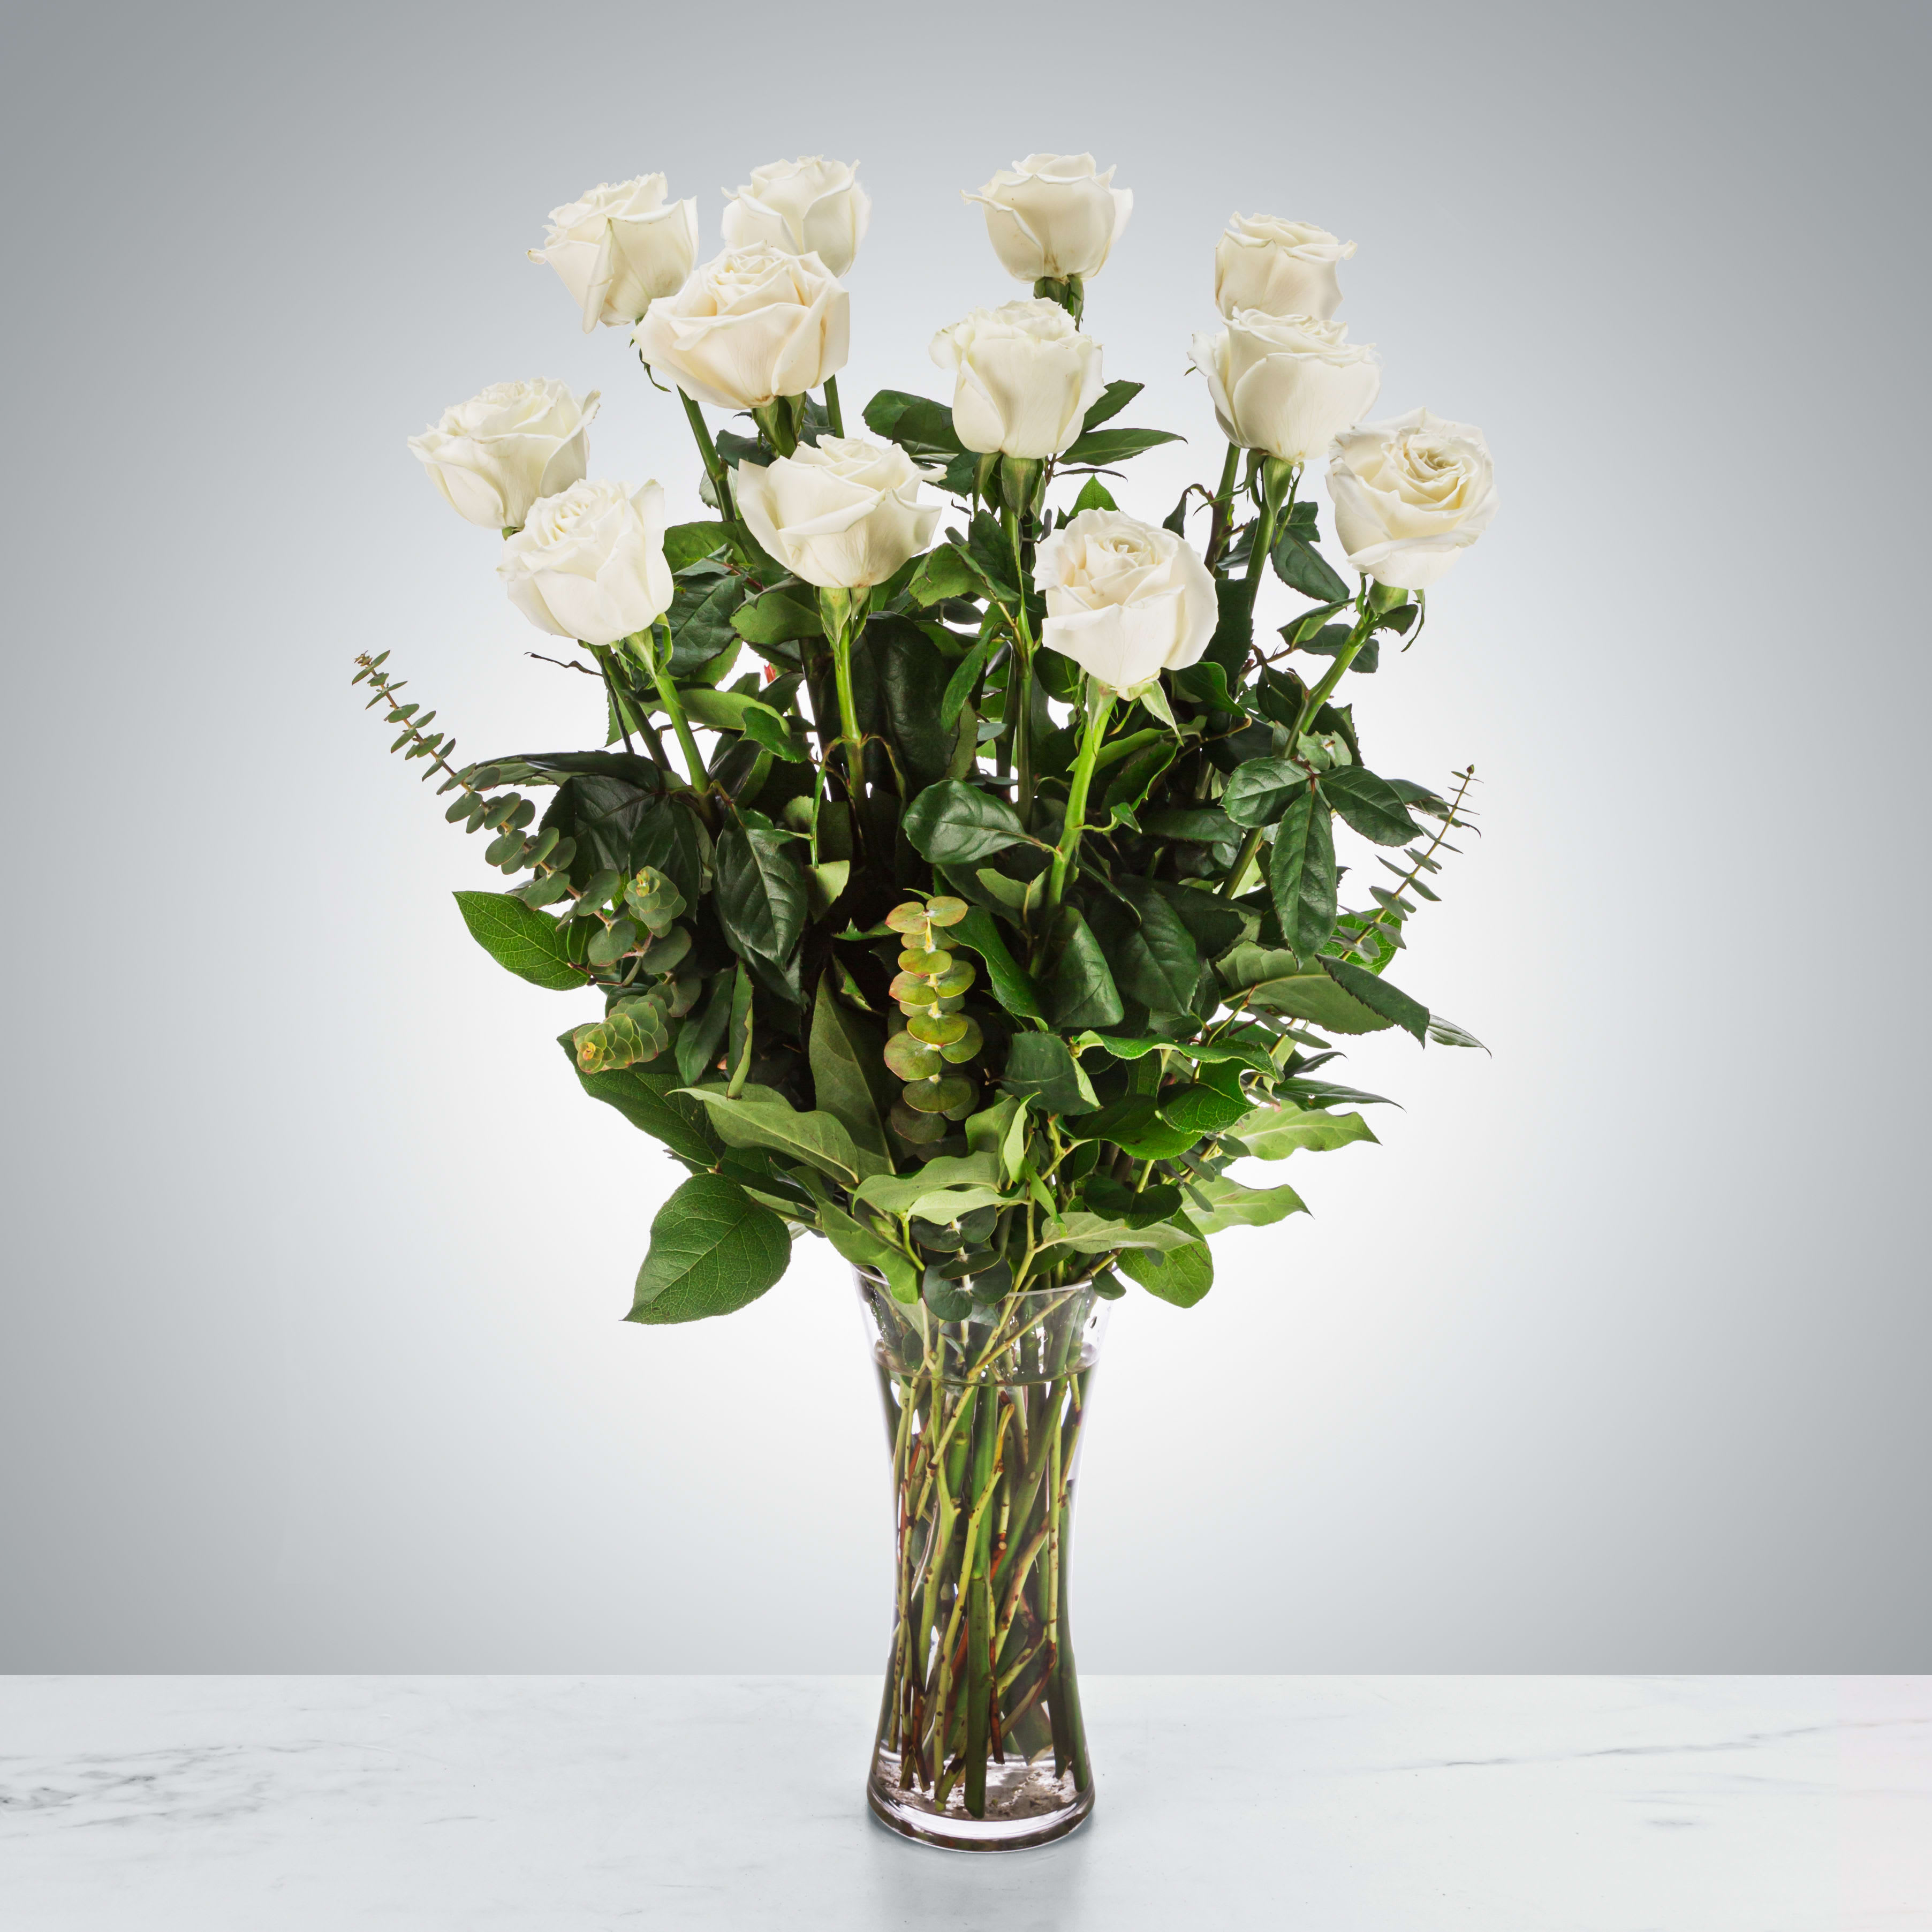 Dozen Long Stem White Roses by BloomNation™ - A dozen white roses are a classic gift! Perfect for Valentine's Day, an Anniversary, or any type of celebration. 